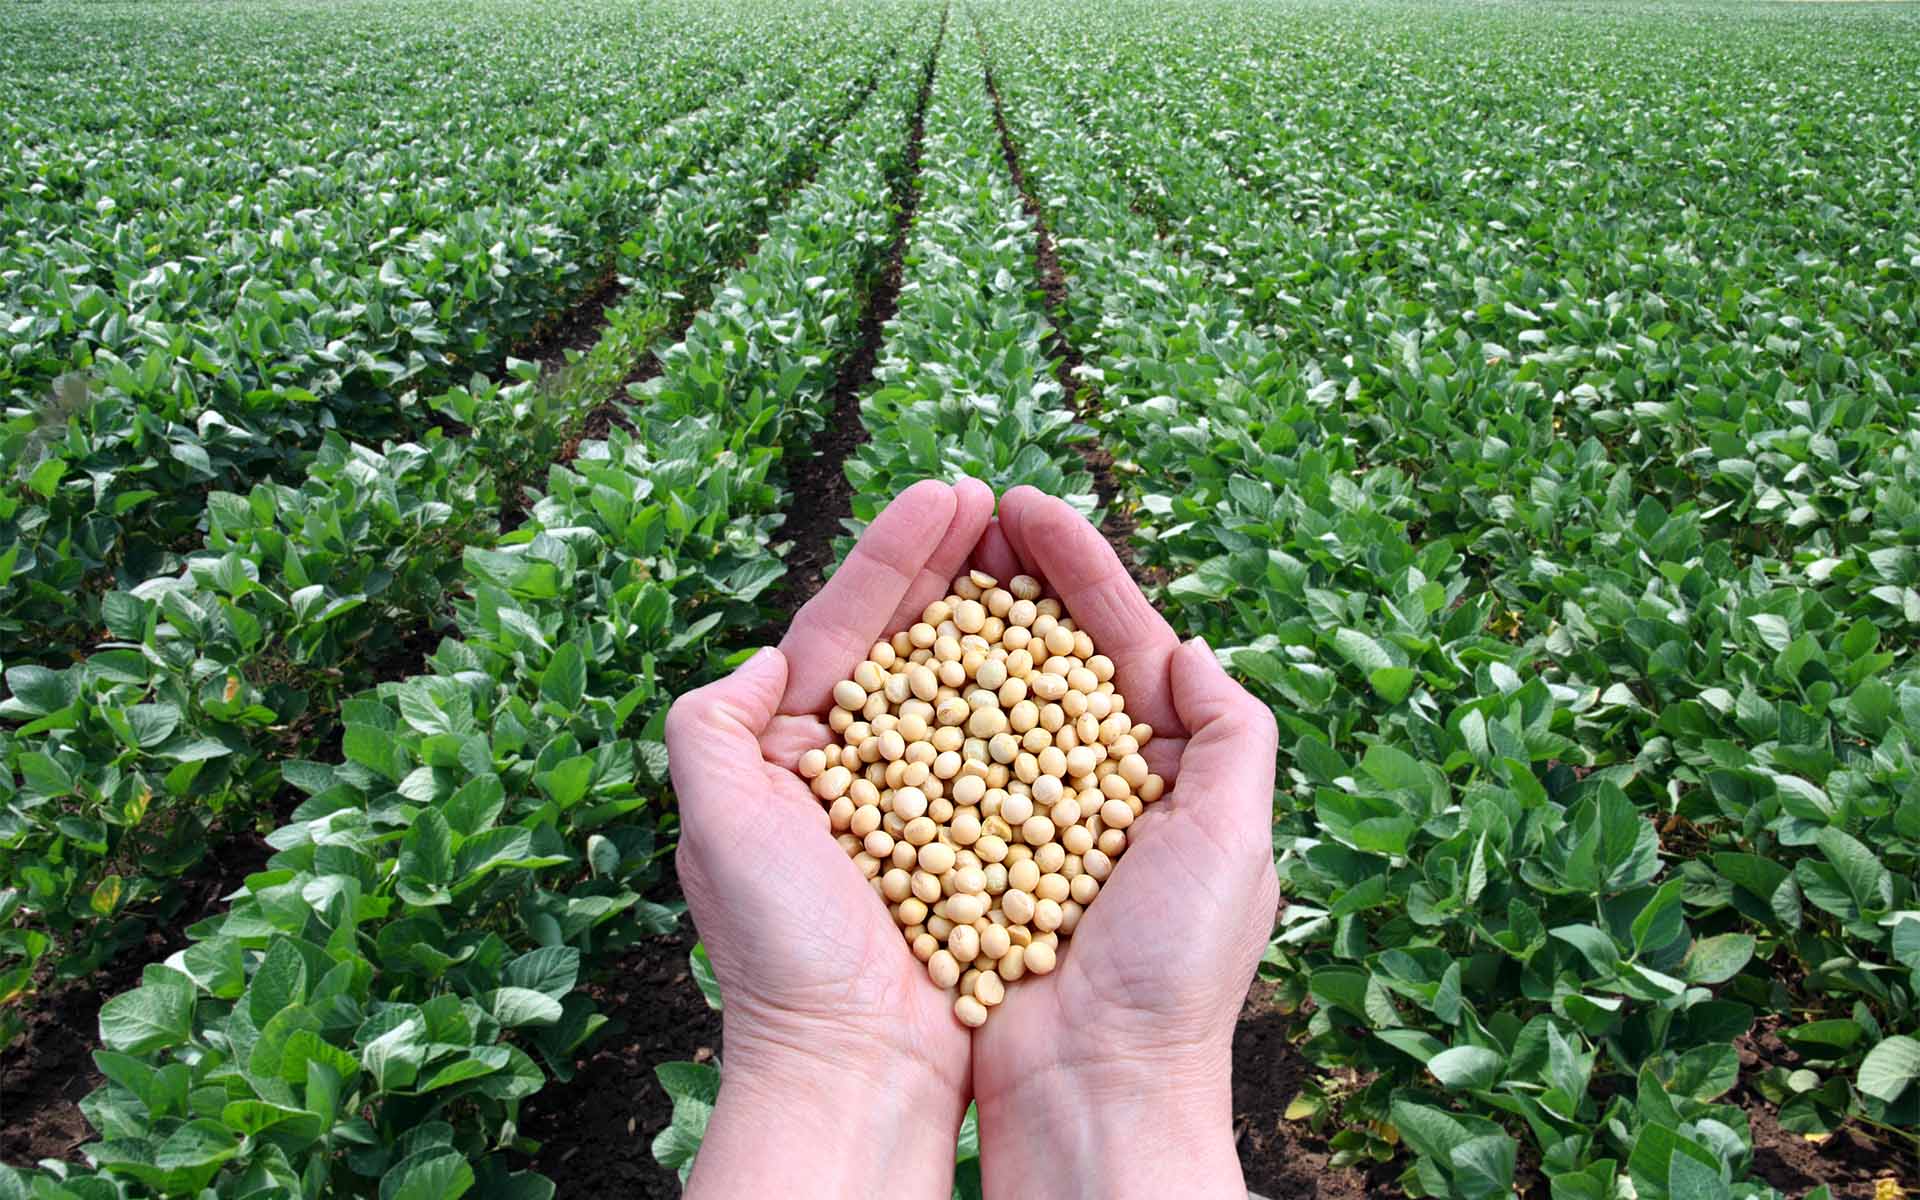 US and China Use Blockchain to Trade Soybeans